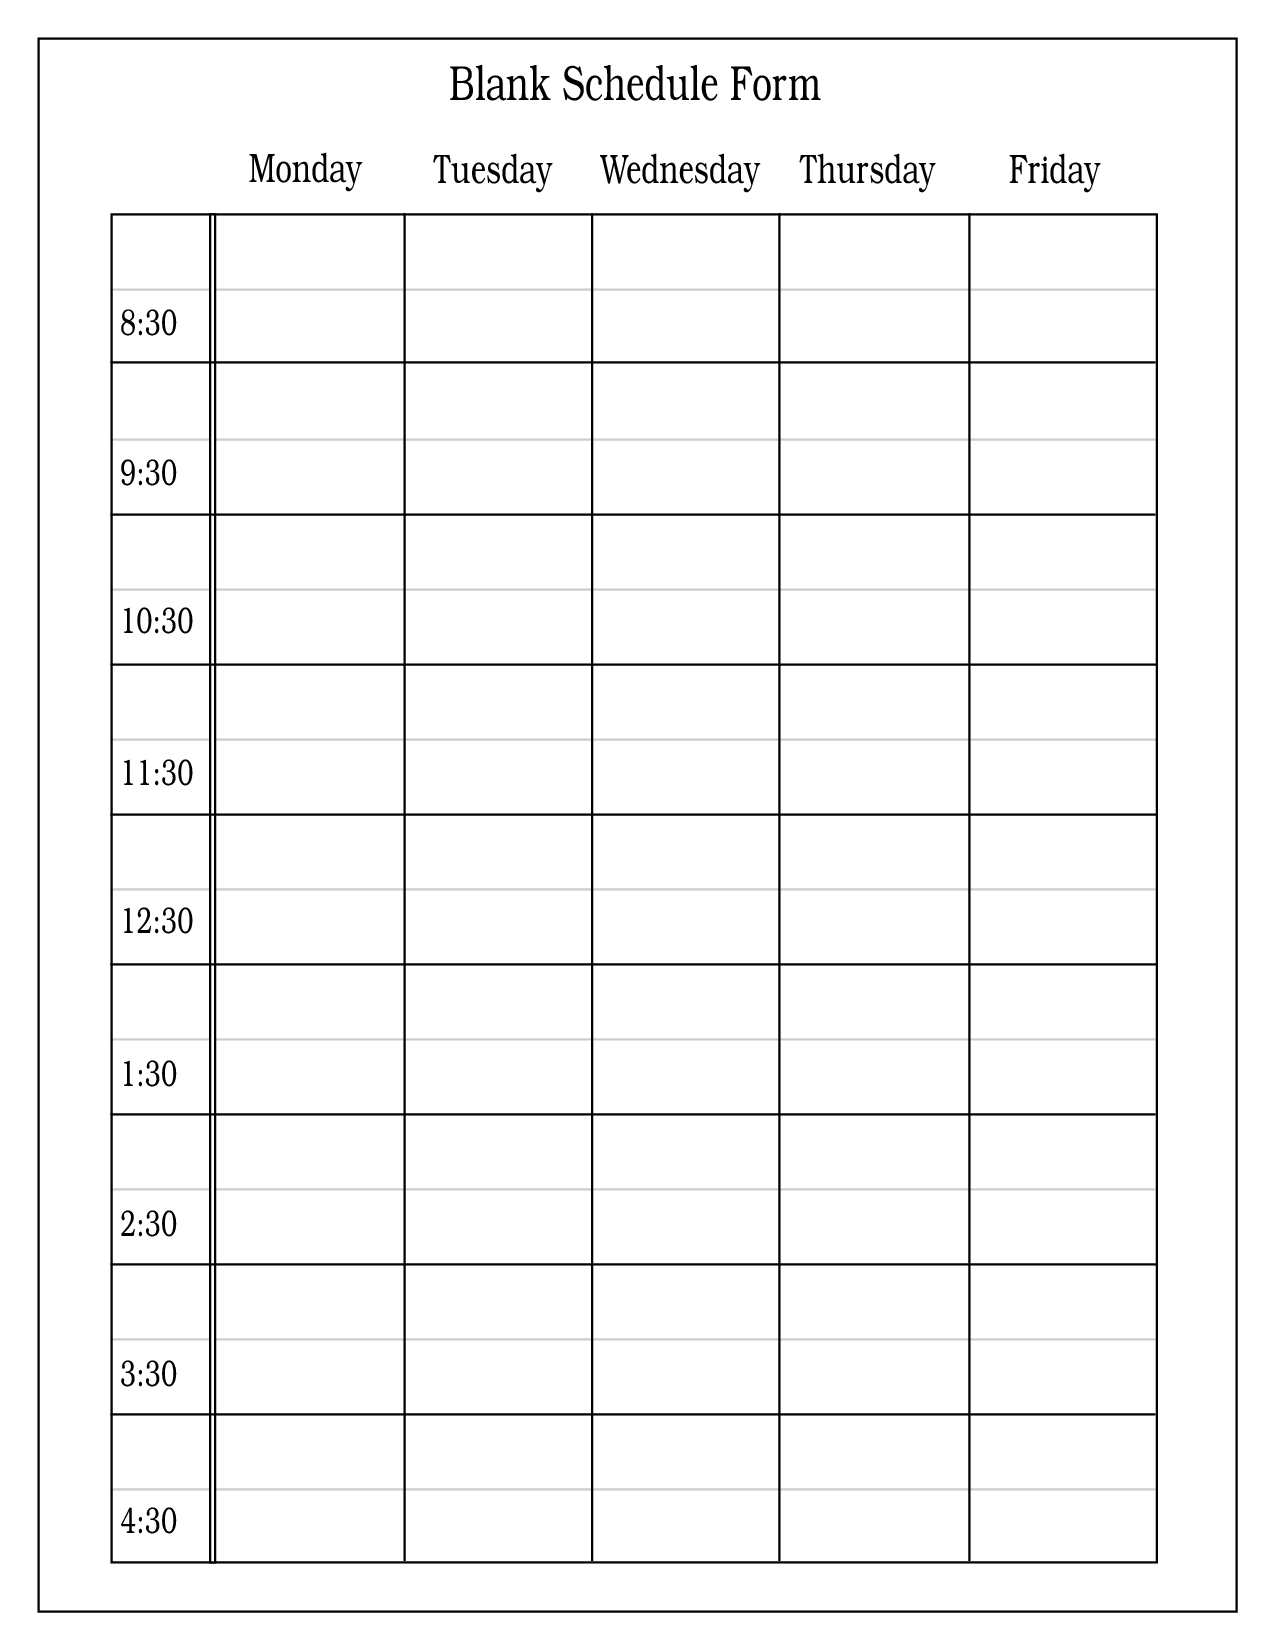 Pick Blank 12 Hour Shift Schedule Templates